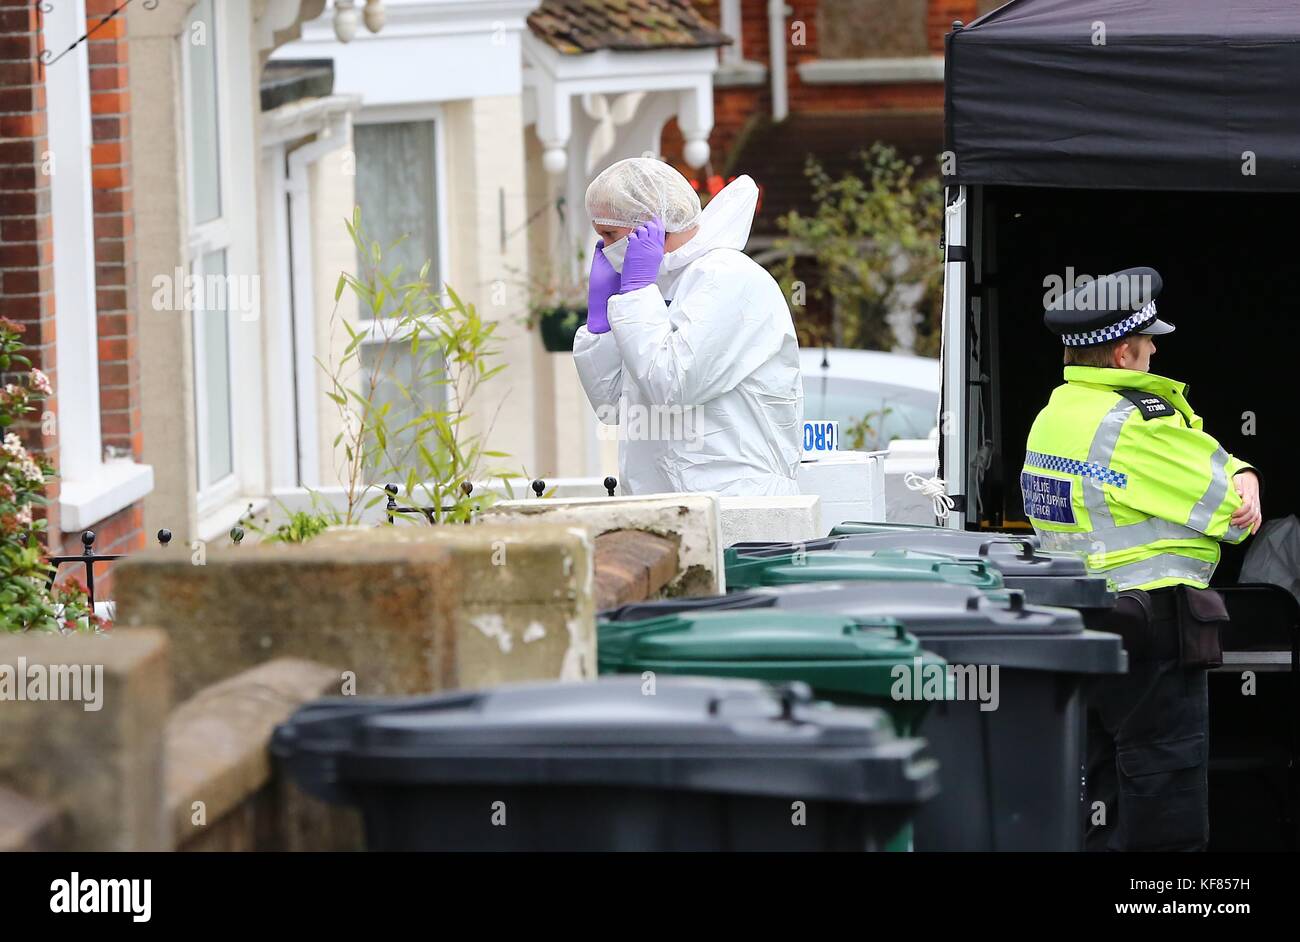 Brighton, UK. 26th October, 2017. Police Scene of Crime Officer enter 8 Sandgate Road, Brighton where Jillian Howell 46 was brutally stabbed to death last night. Her work colleage Dave Browning 51 has been charged with her murder and is awaiting trial. Stock Photo